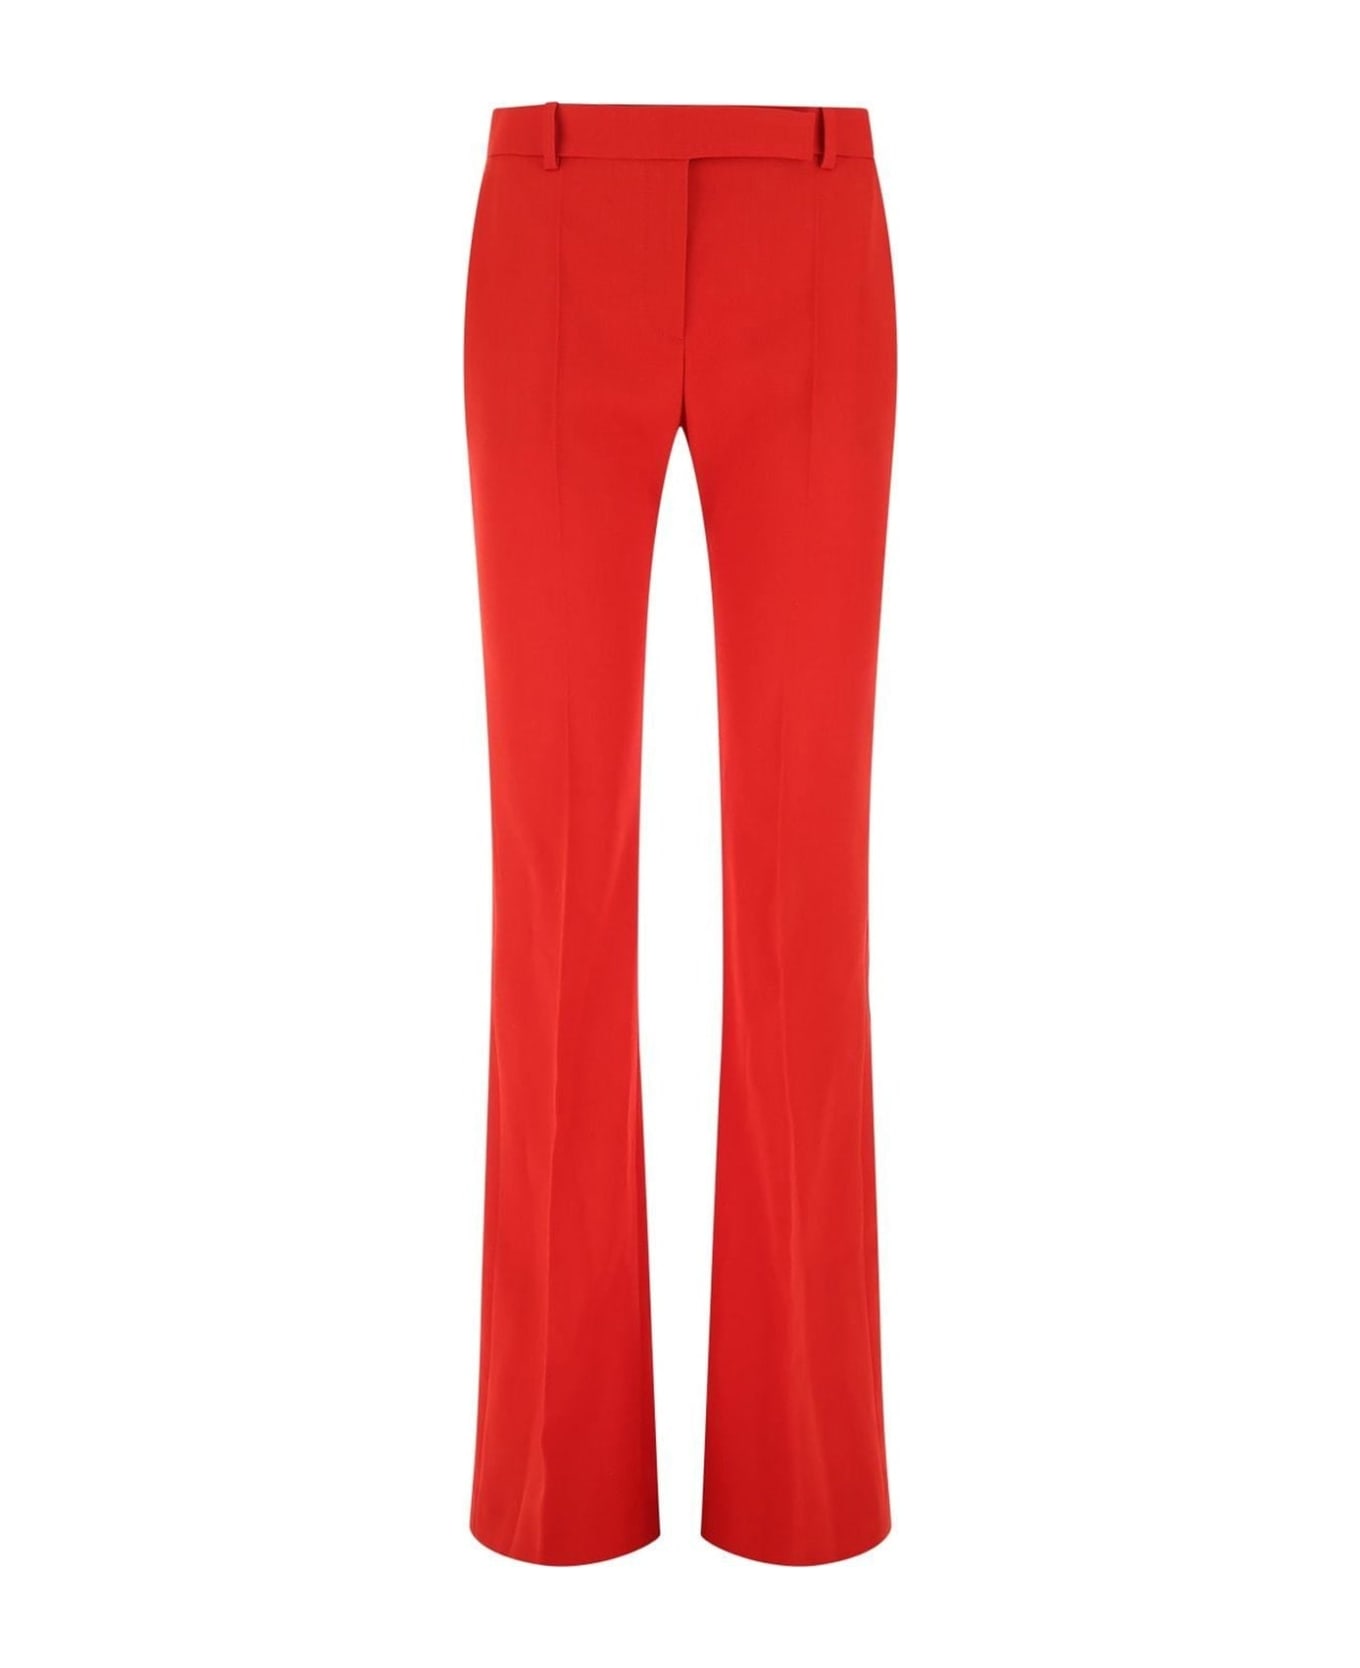 Alexander McQueen Wool Trousers - Red ボトムス